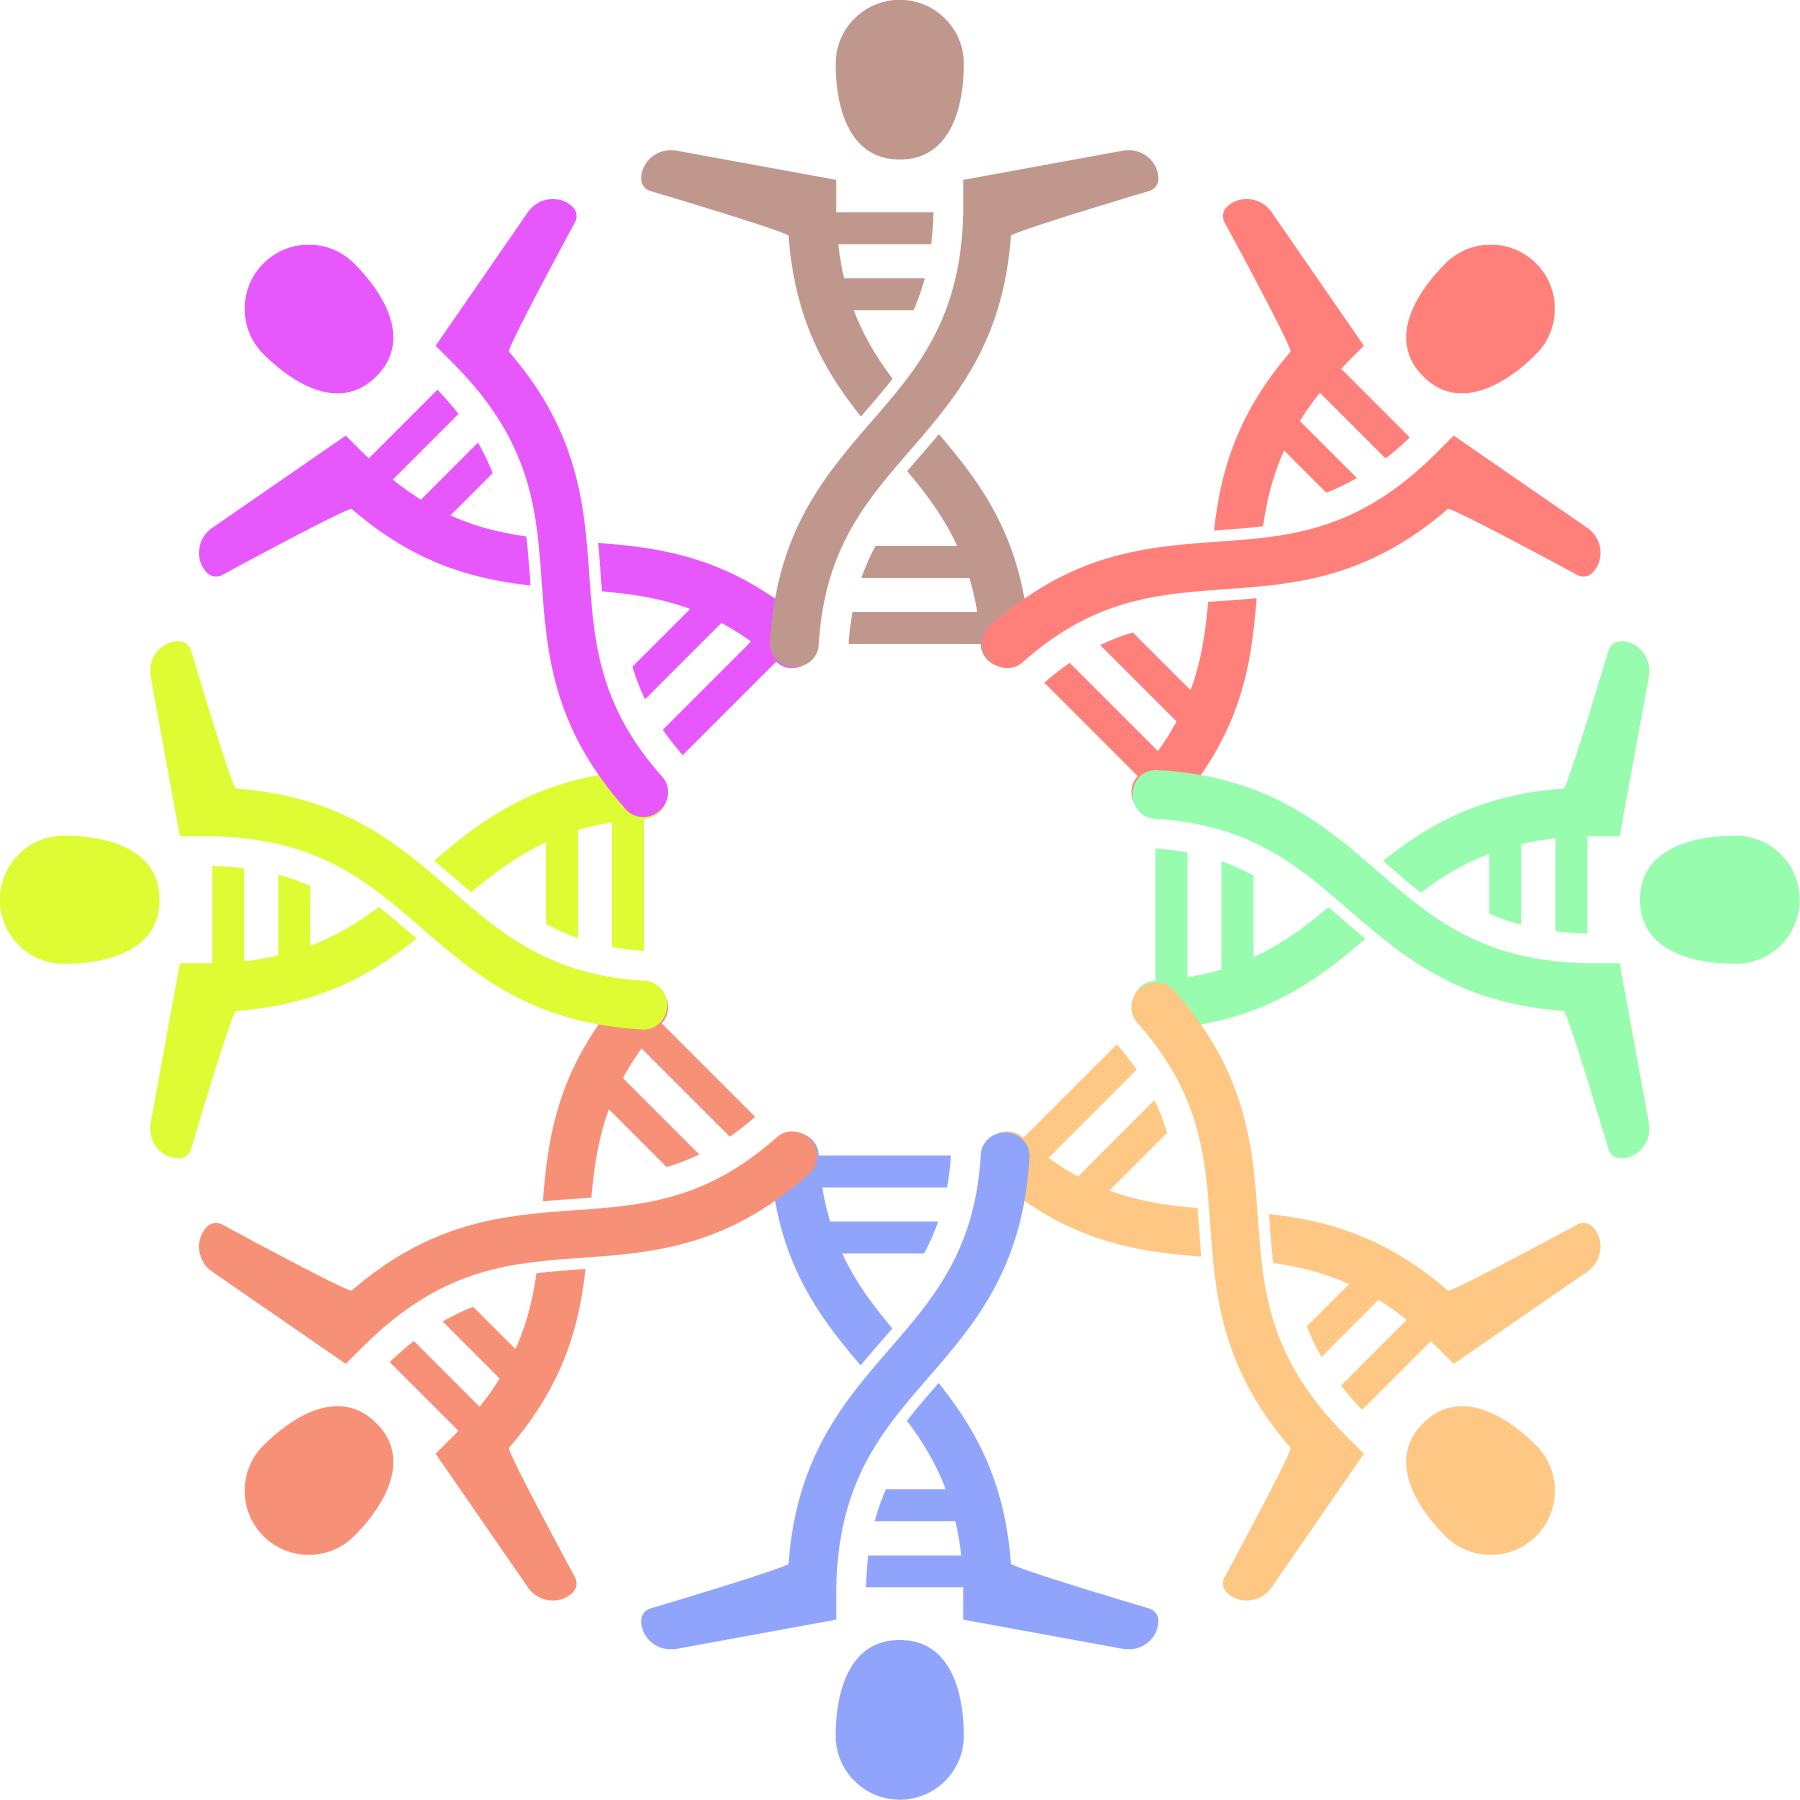 Diversity Centers for Genome Research